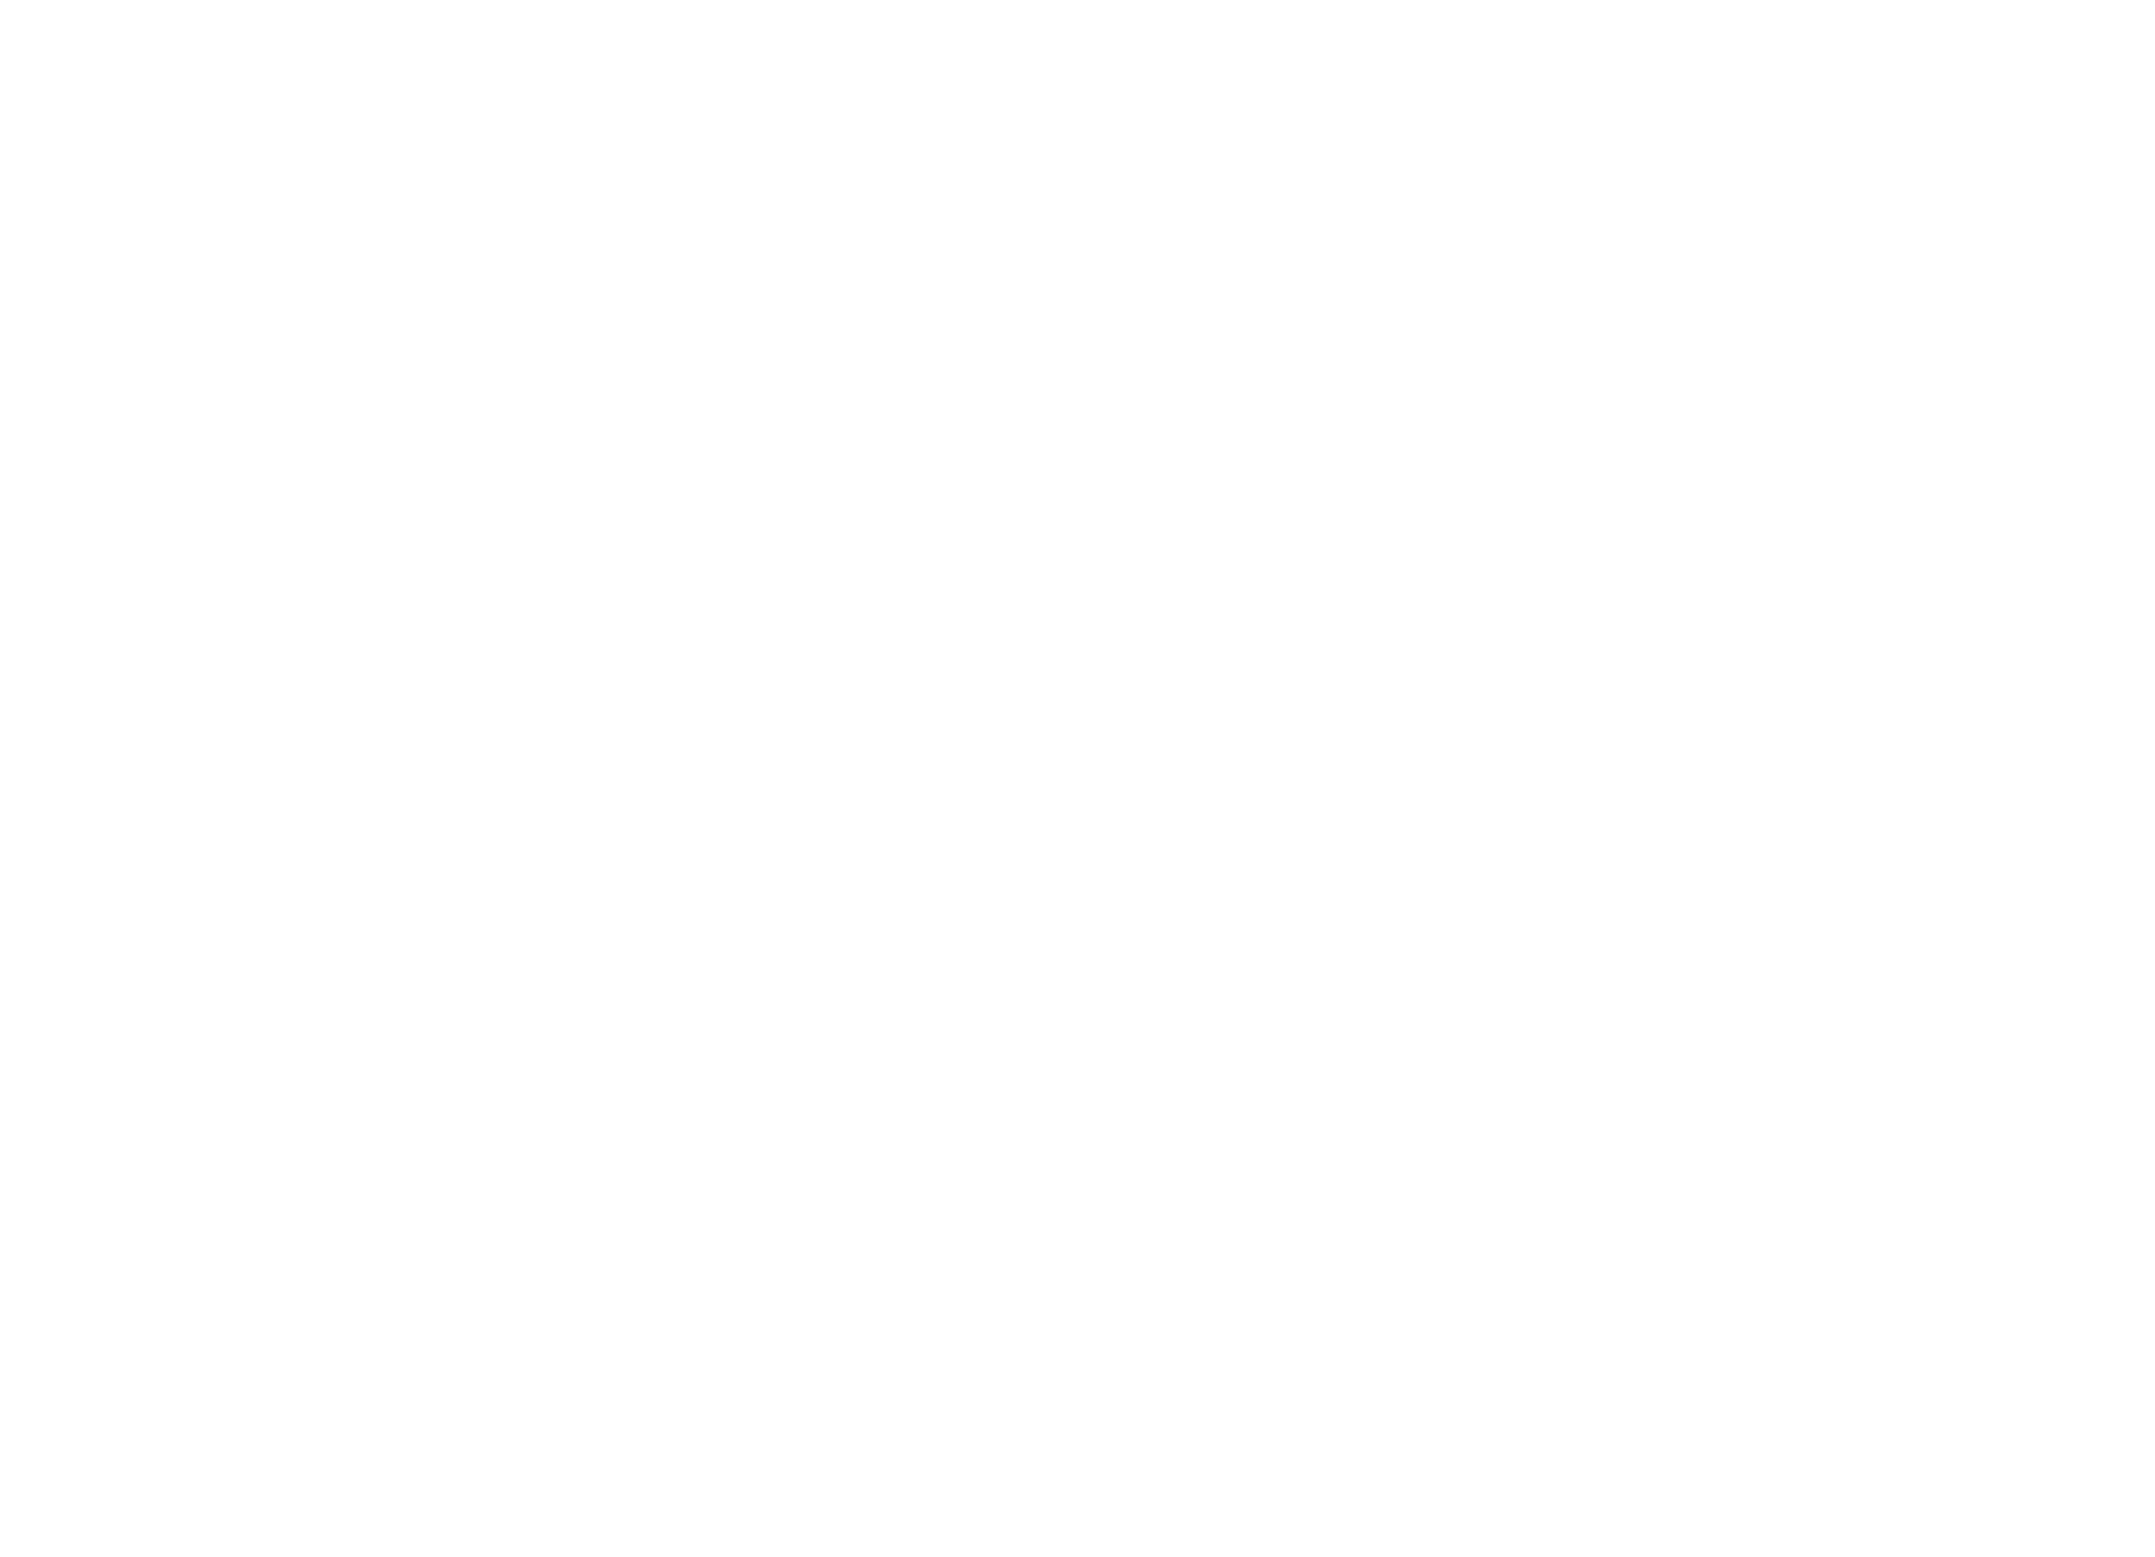 Join The Fight